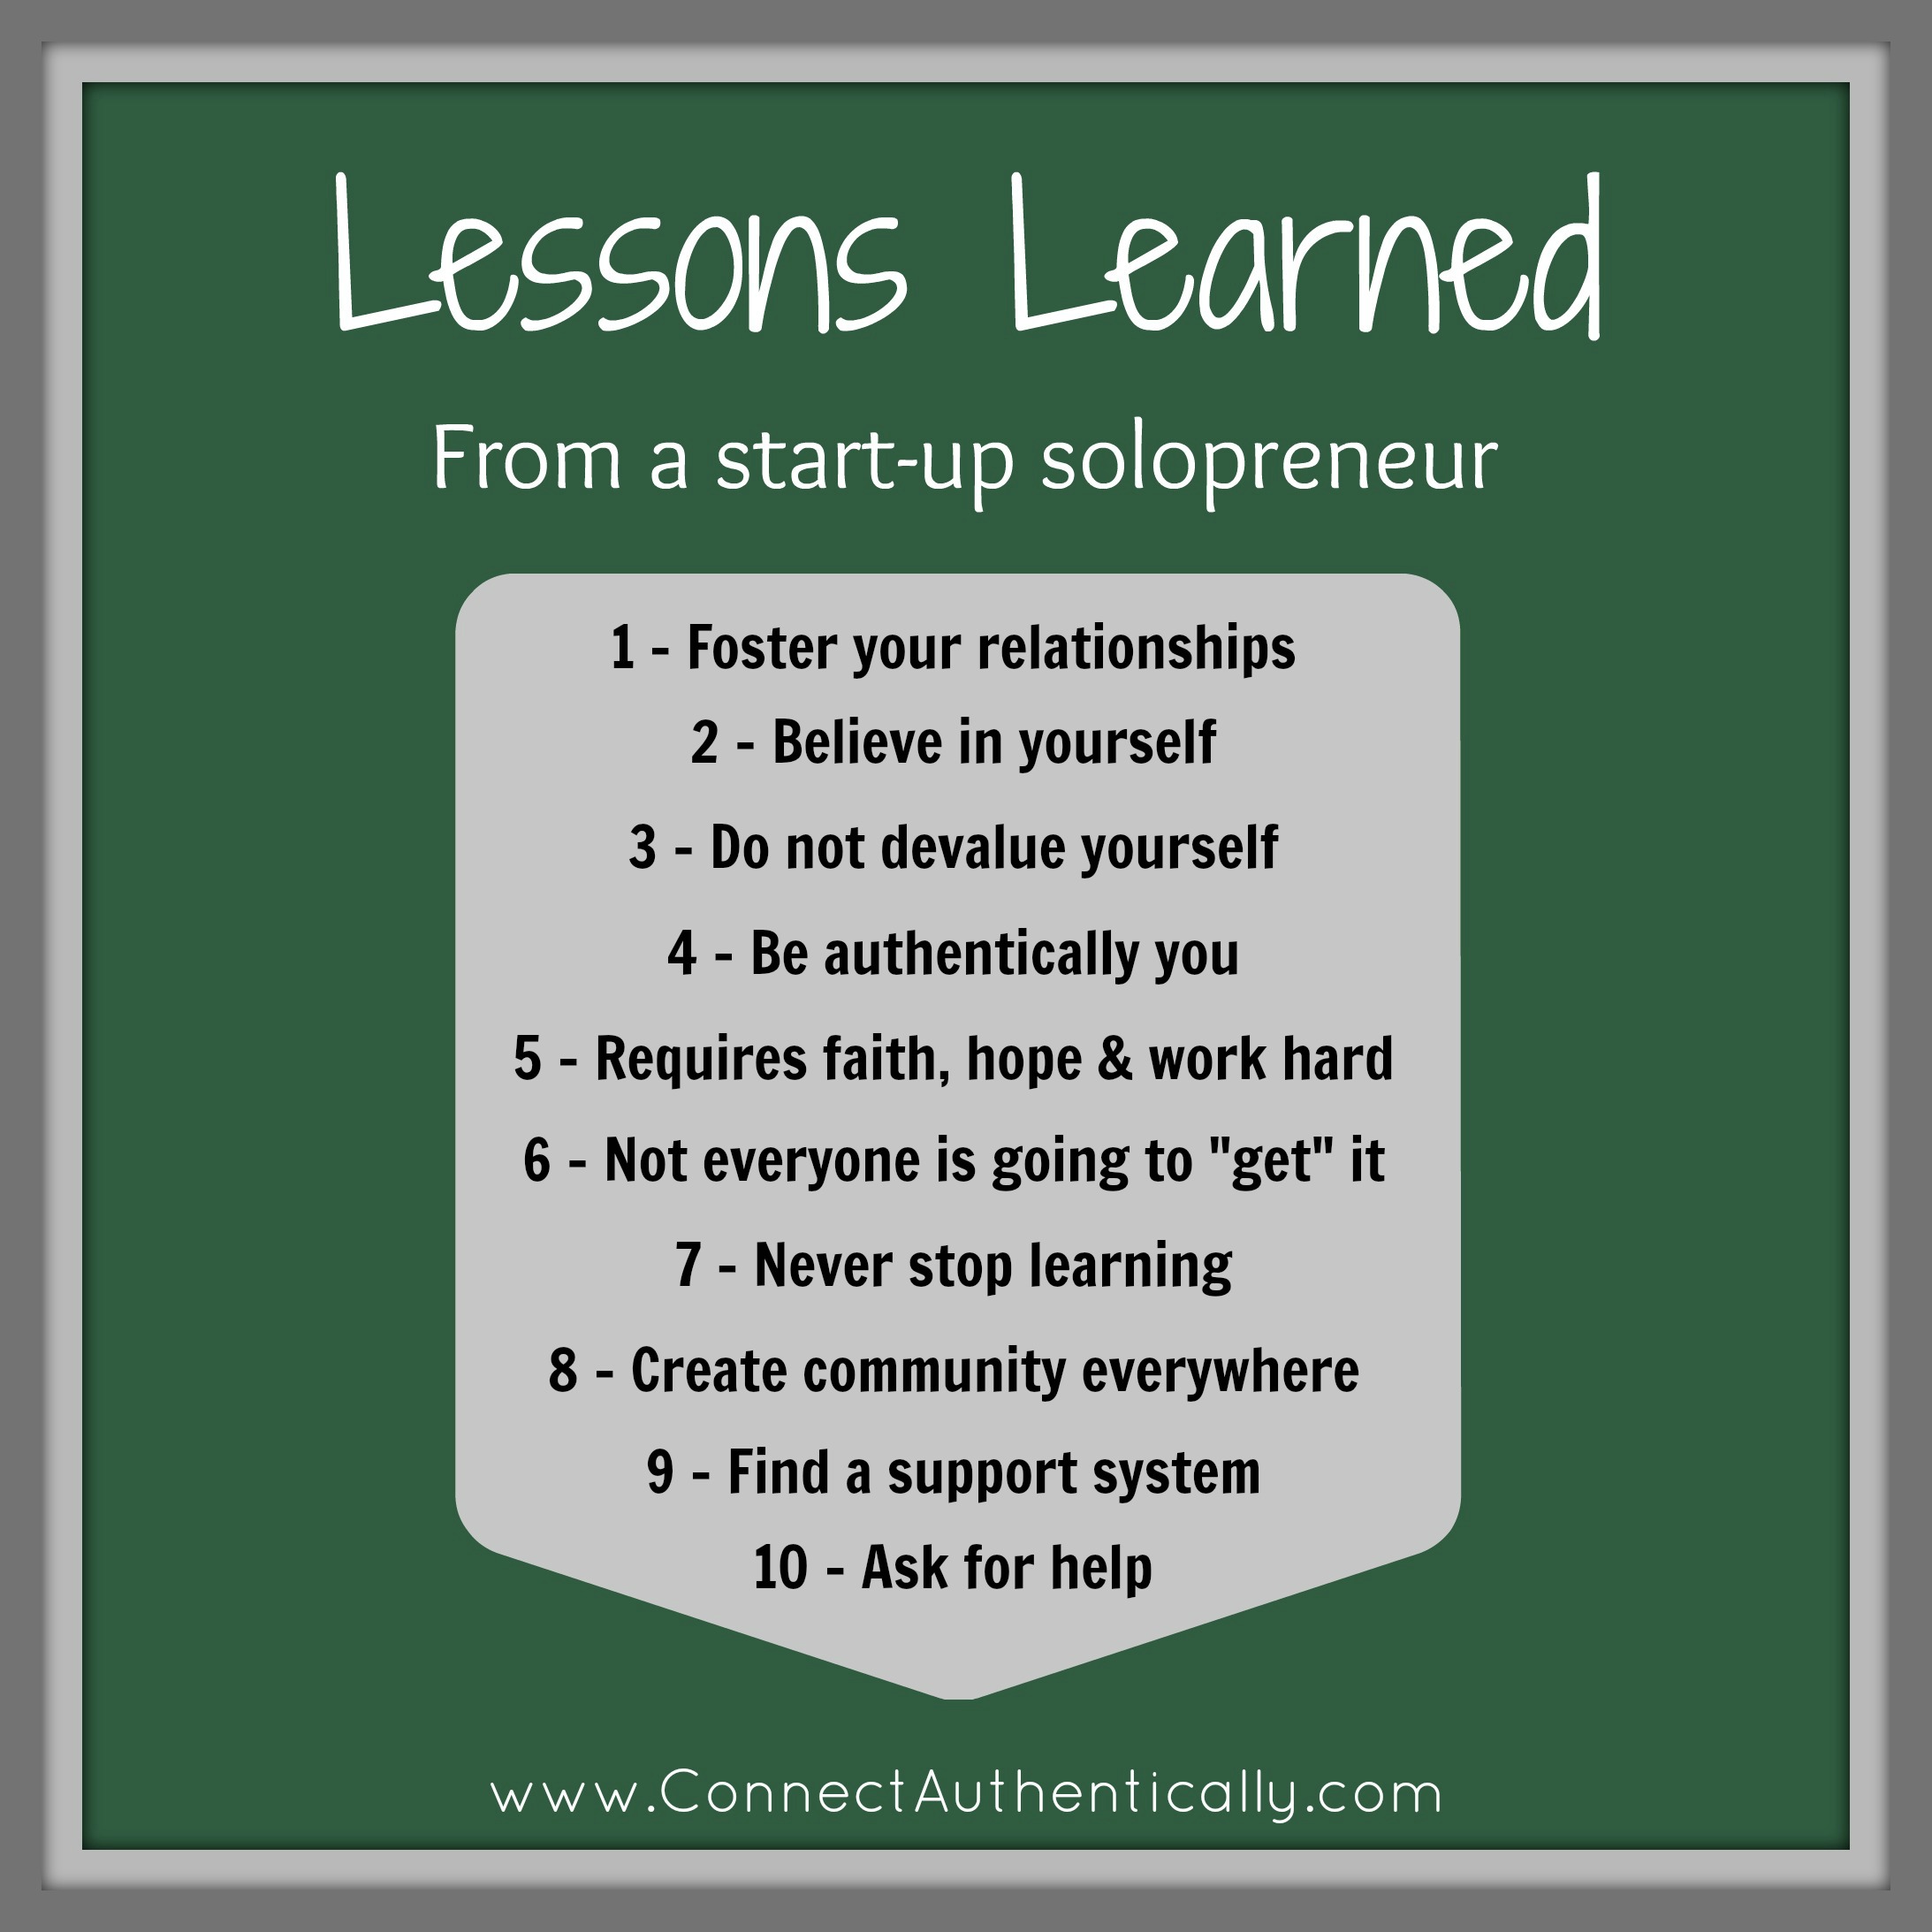 10 Lessons that Start-Ups Learn the Hard Way